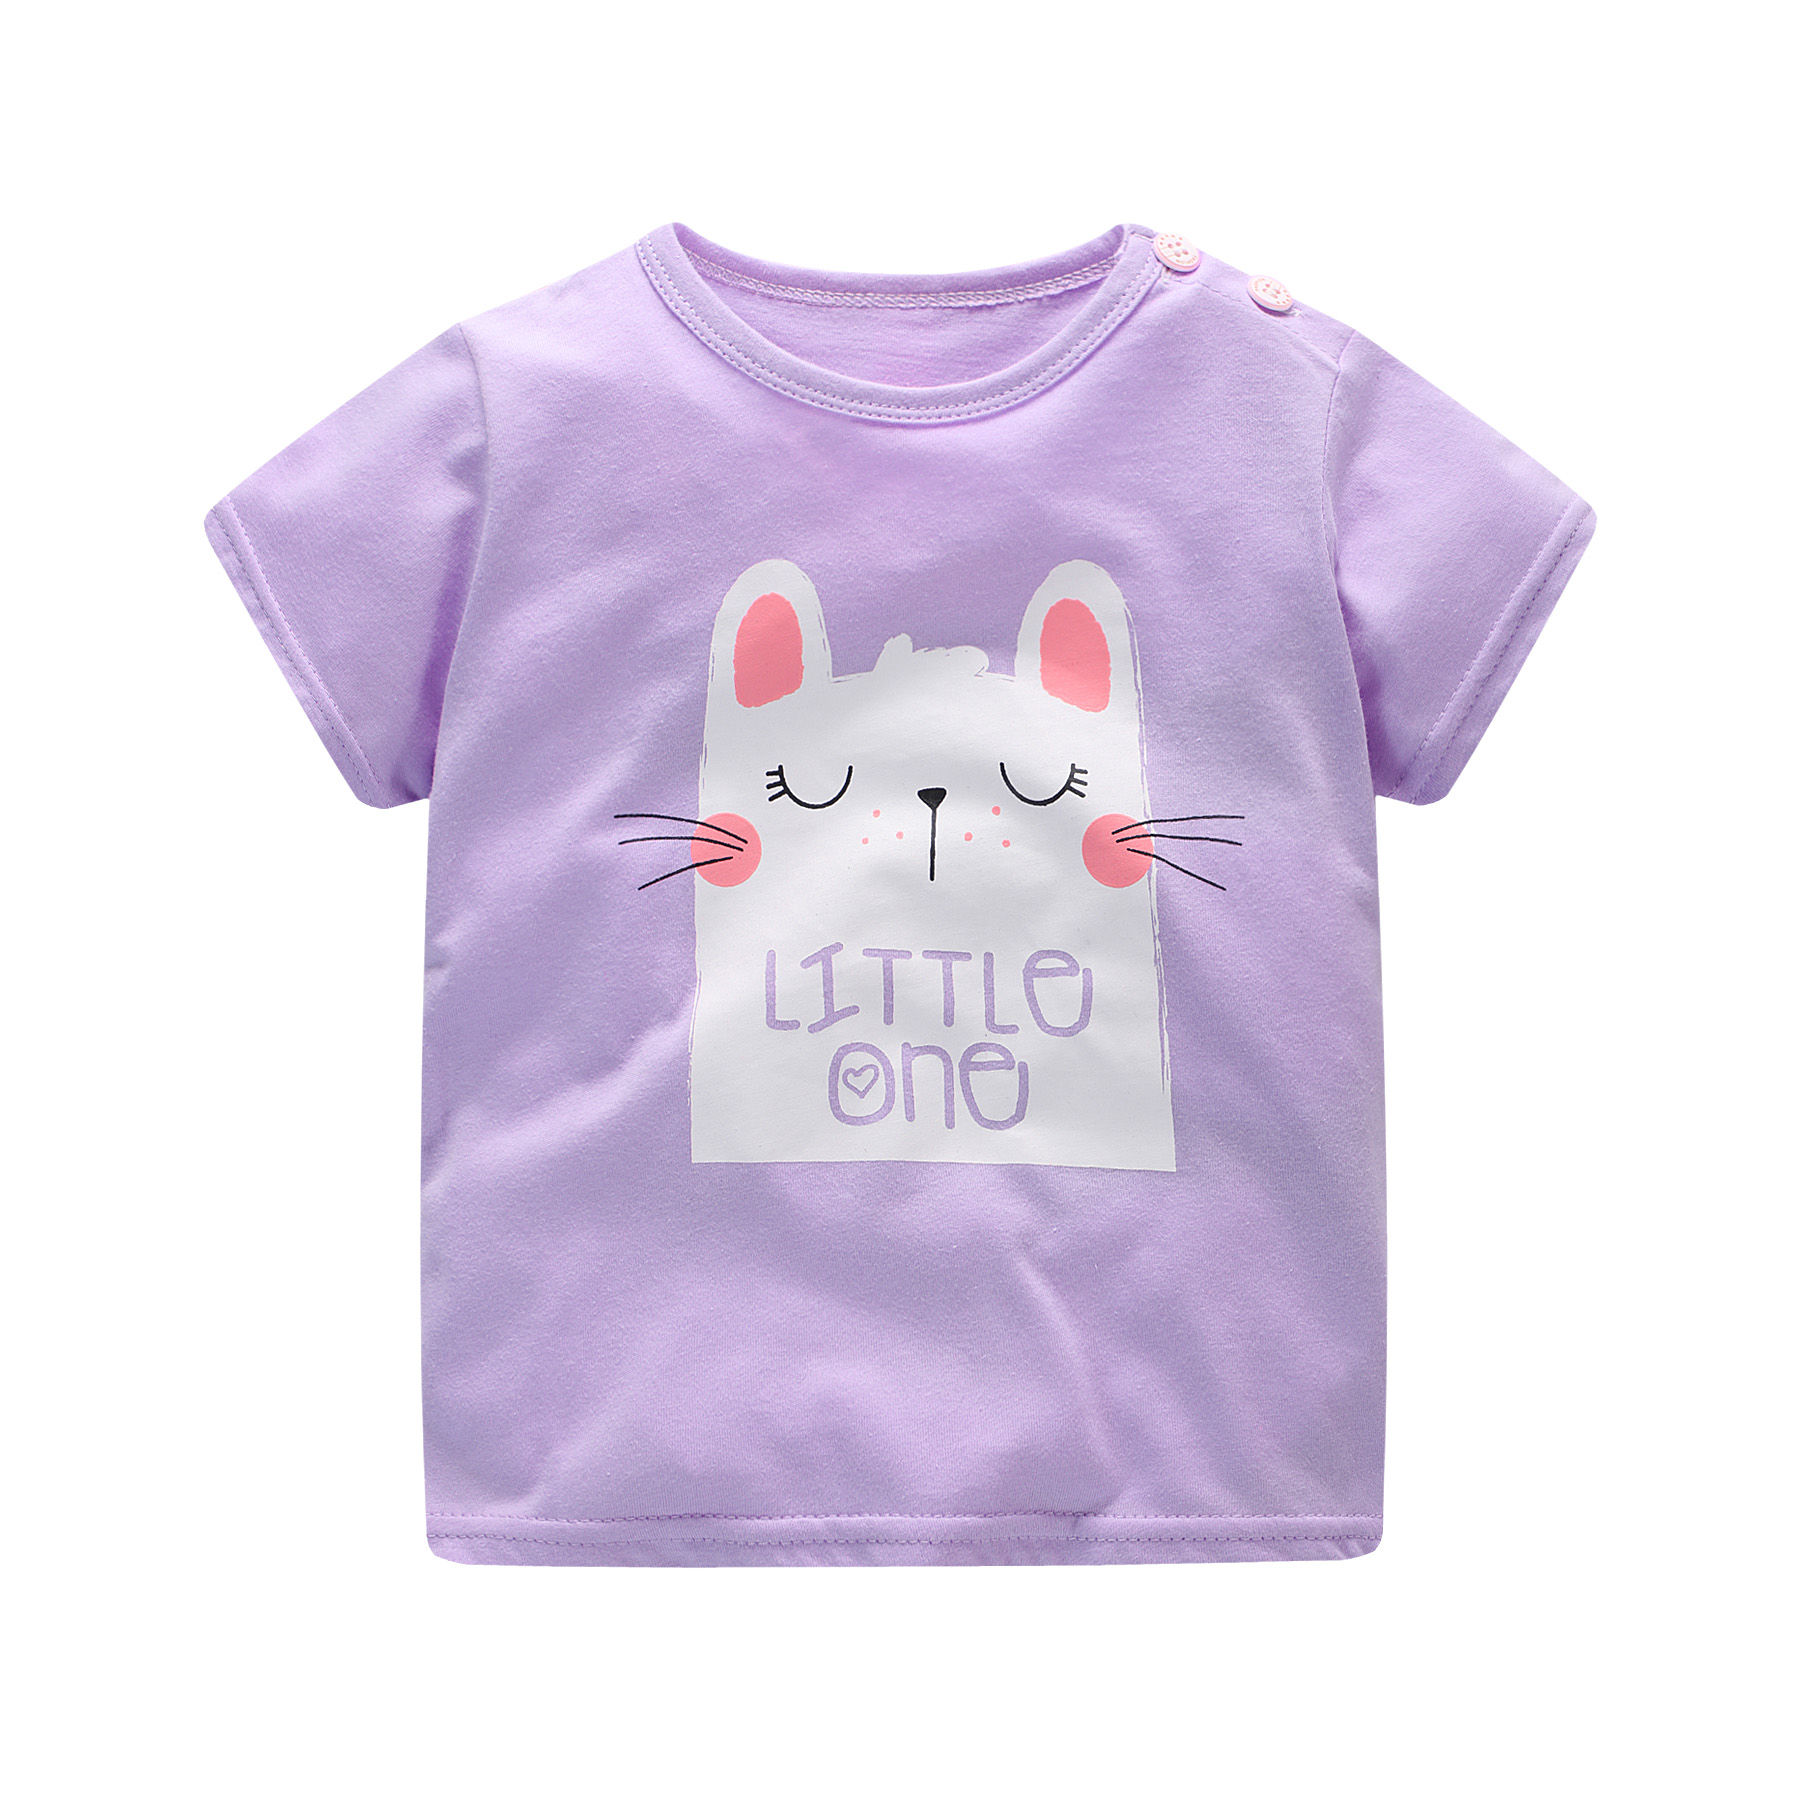 100% cotton tee for girls | purple tee with mouse | cute mousy t-shirt